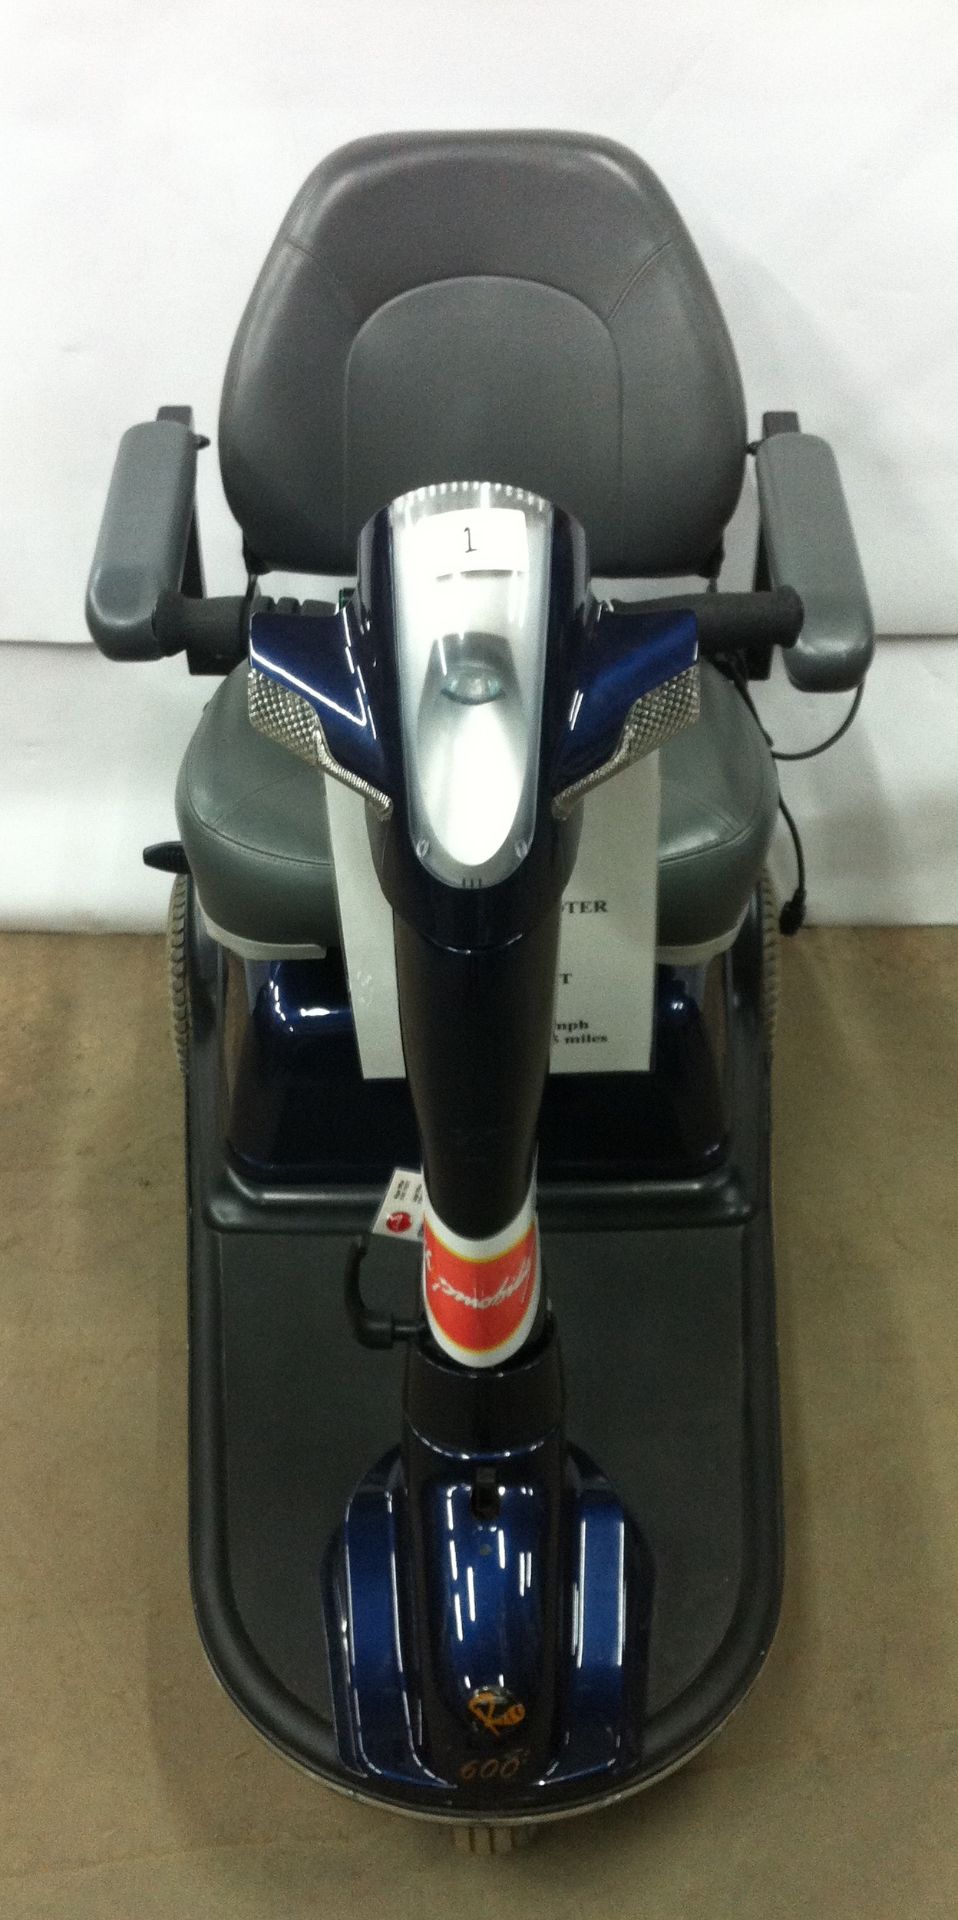 Rascal 600T Mobility Scooter - Image 2 of 4